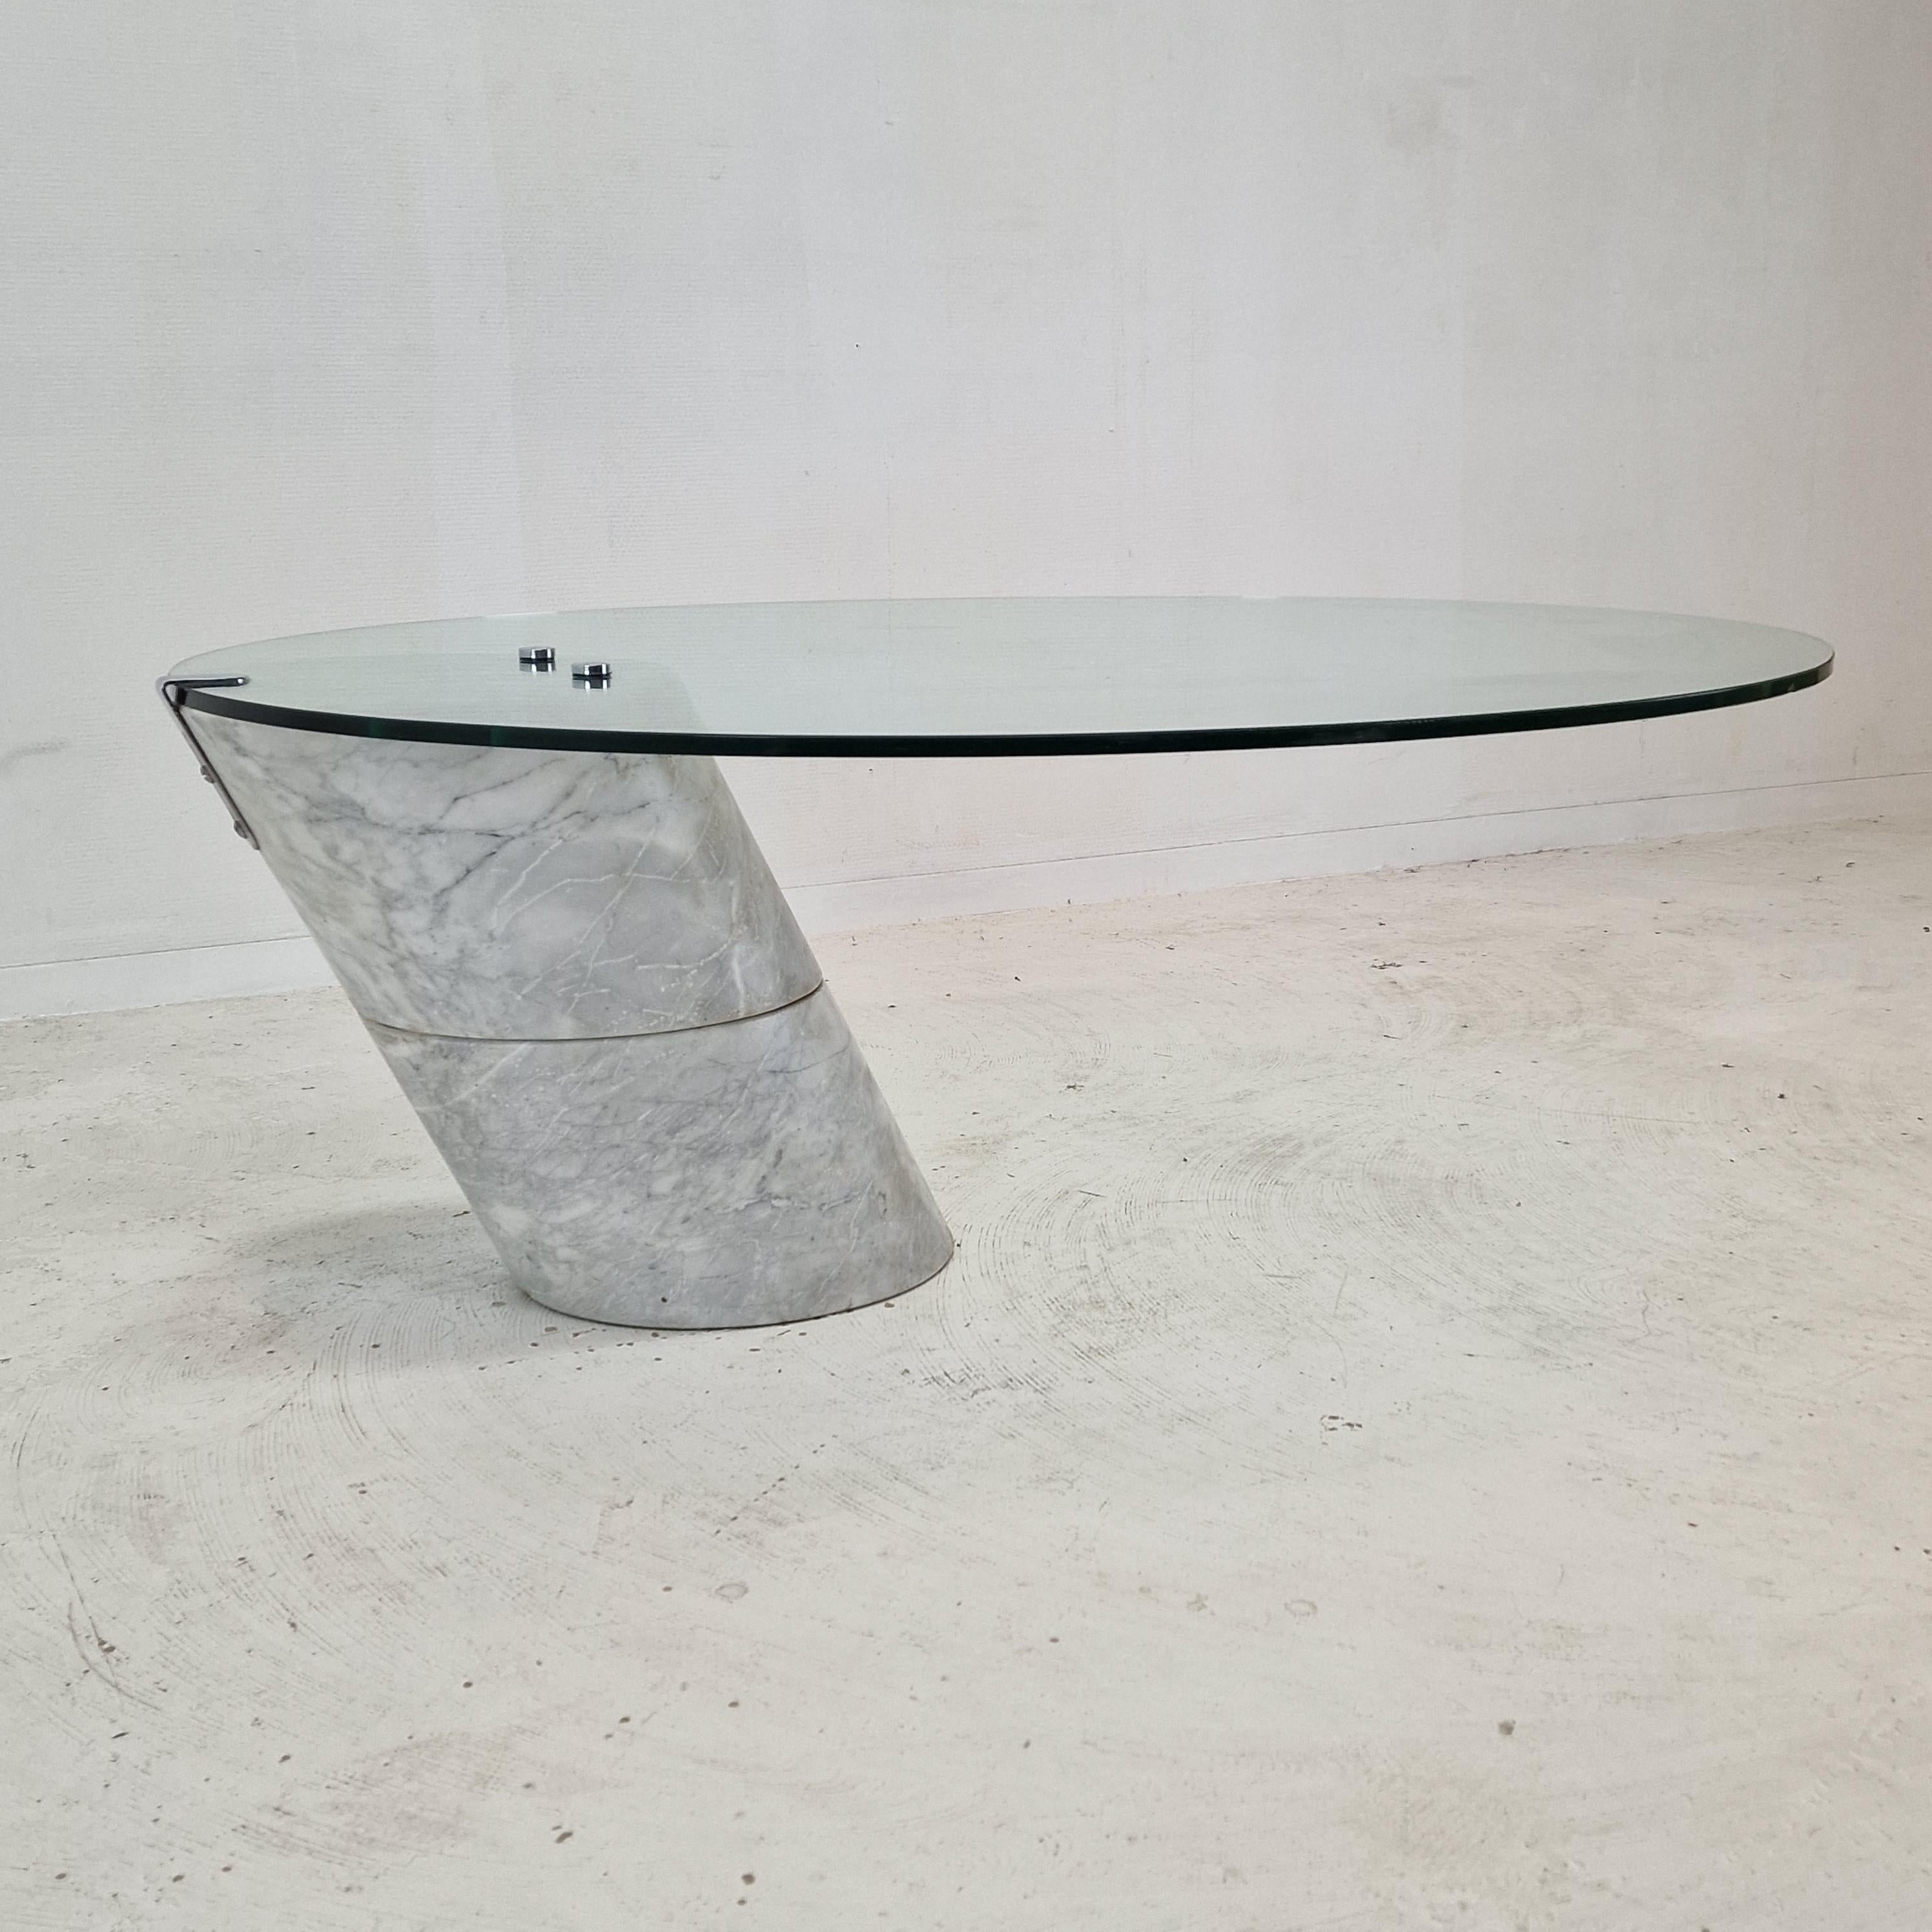 Beautiful glass Carrara marble coffee Table, K1000, Team Form AG, Ronald Schmitt, 1975  

This white marble and glass coffee table, model K1000, was created by Team Form AG for Ronald Schmitt in 1975. 

What makes the item rather minimalist is the